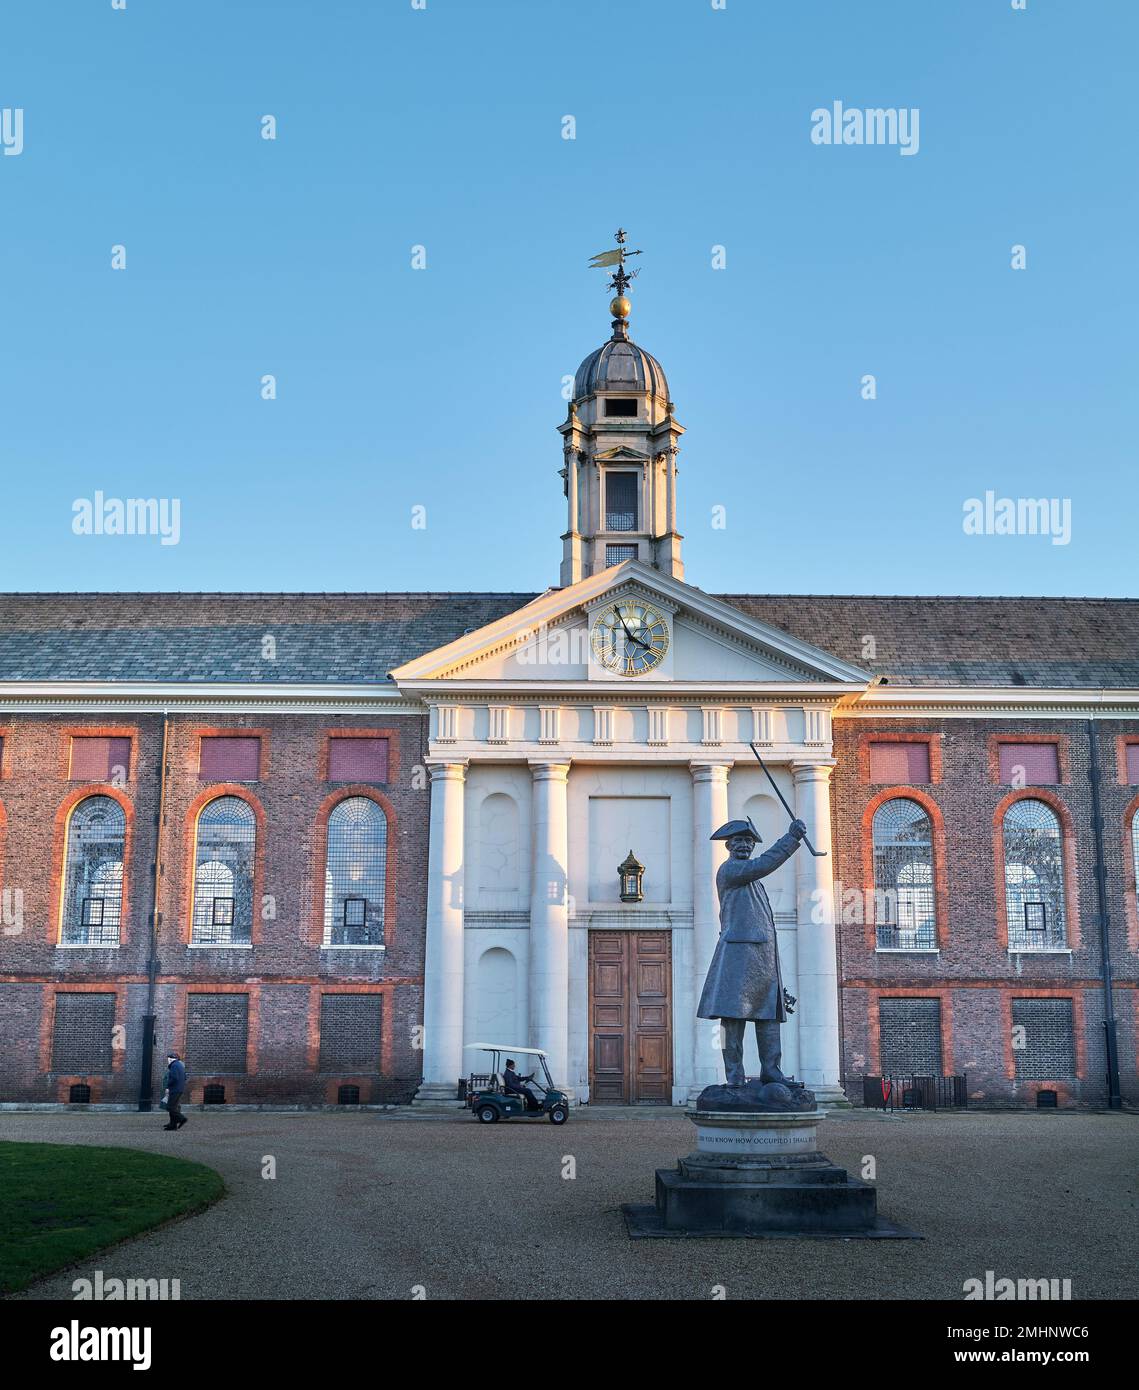 Main entrance to Royal Chelsea Hospital, London, England, founded in the seventeenth century by king Charles II for retired miltary pensioners. Stock Photo